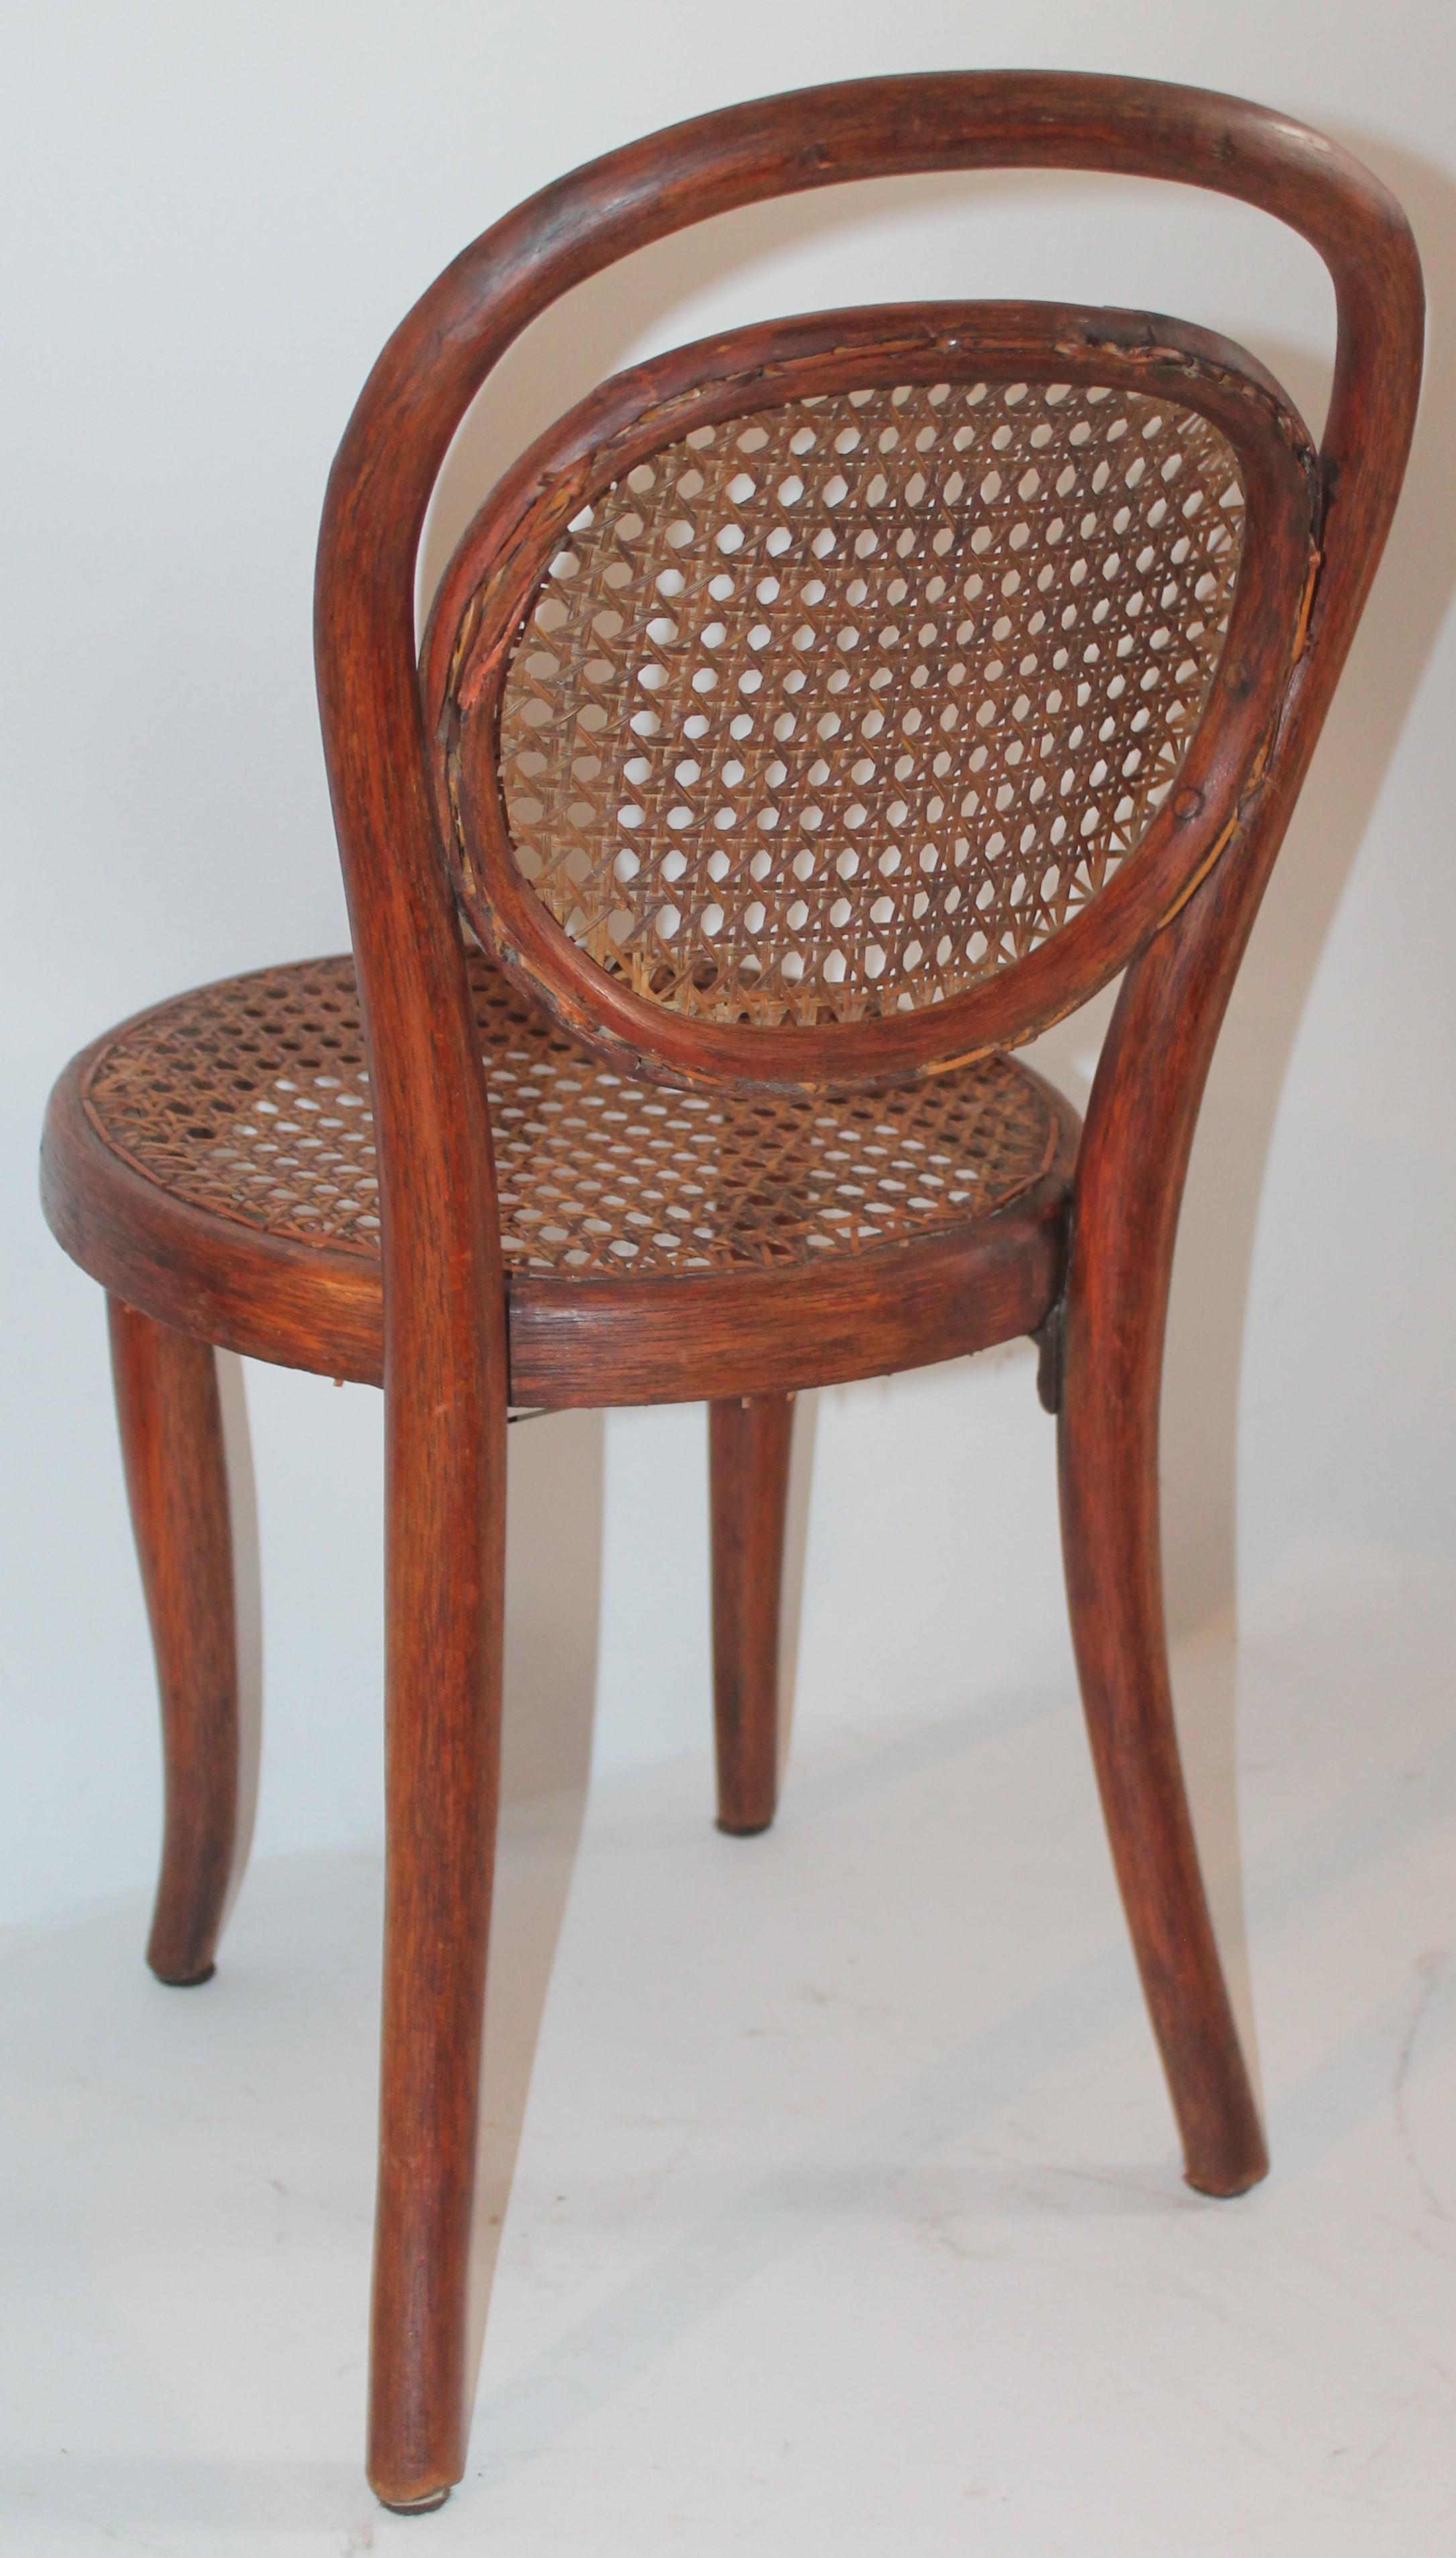 Bentwood Rocker and Chair with Cane Seats, 19th Century For Sale 10